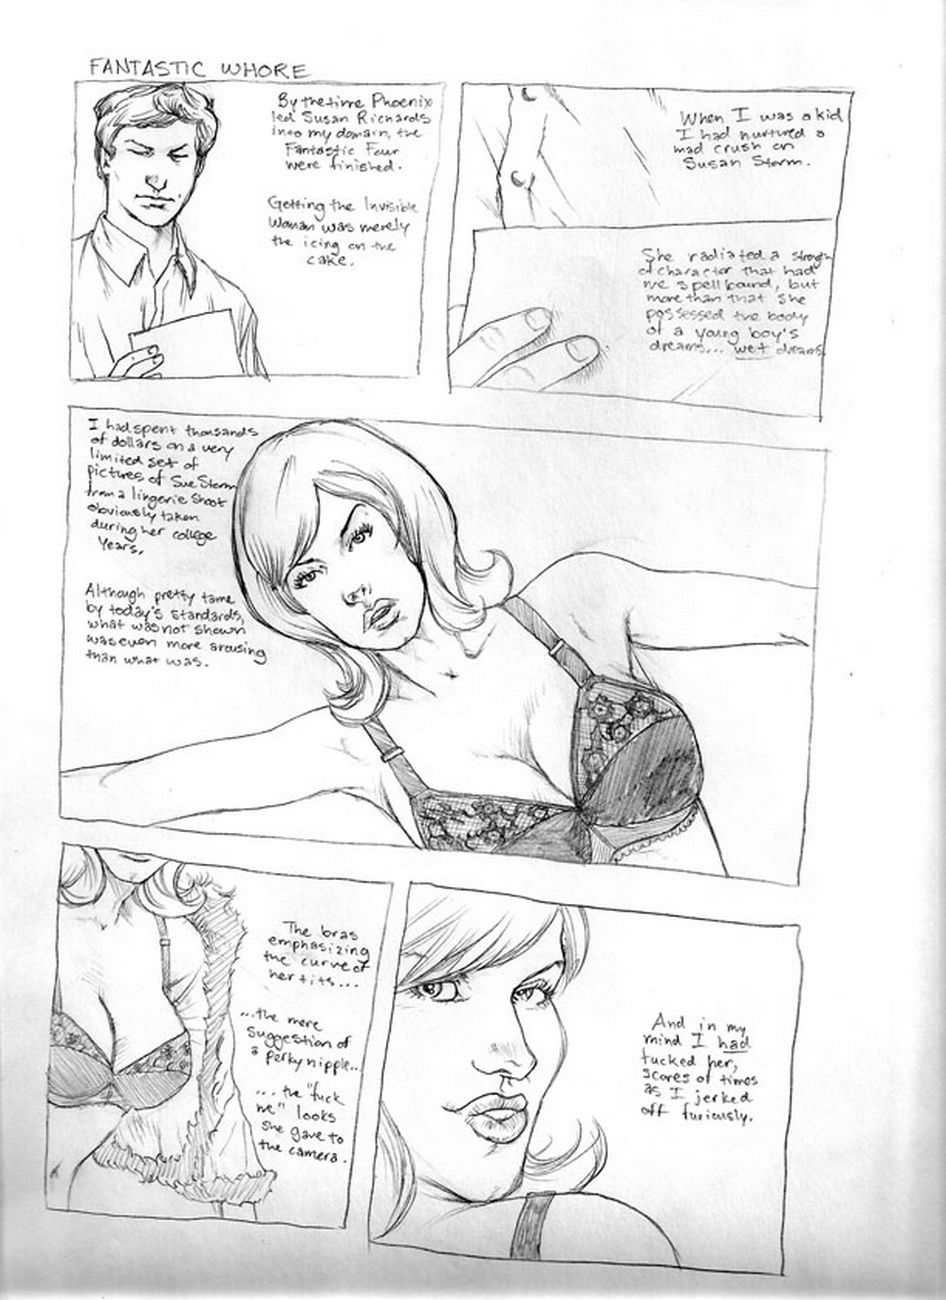 Submission Agenda 5 - The Invisible Woman page 2